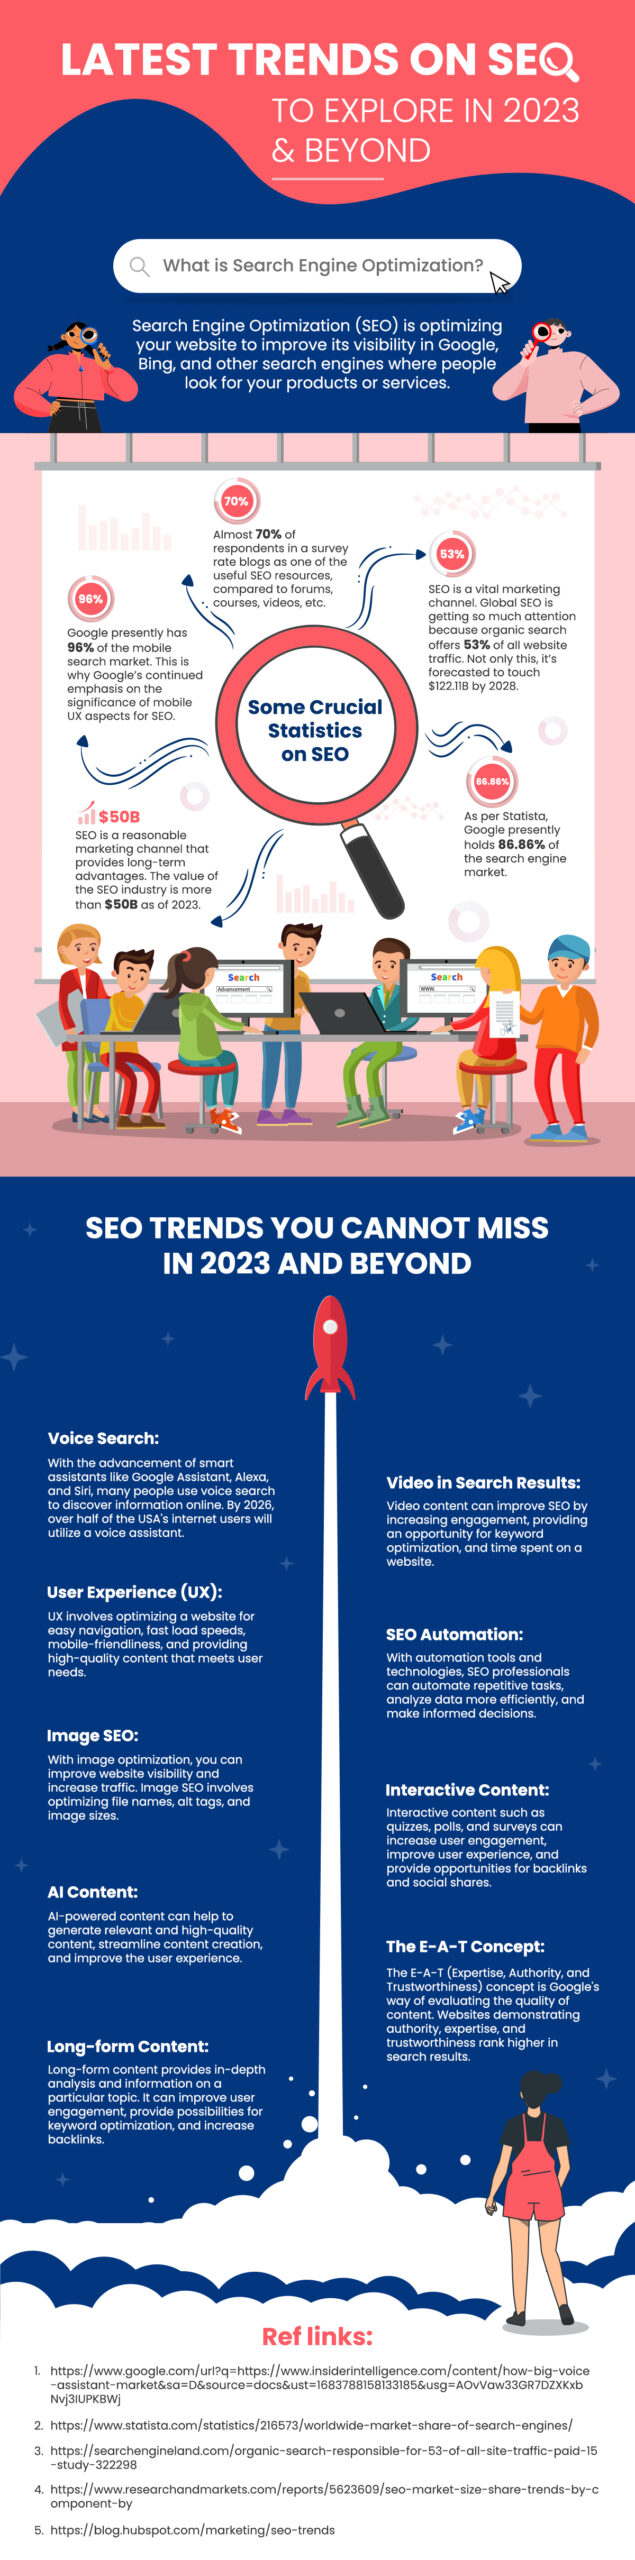 Infographic on latest SEO trends